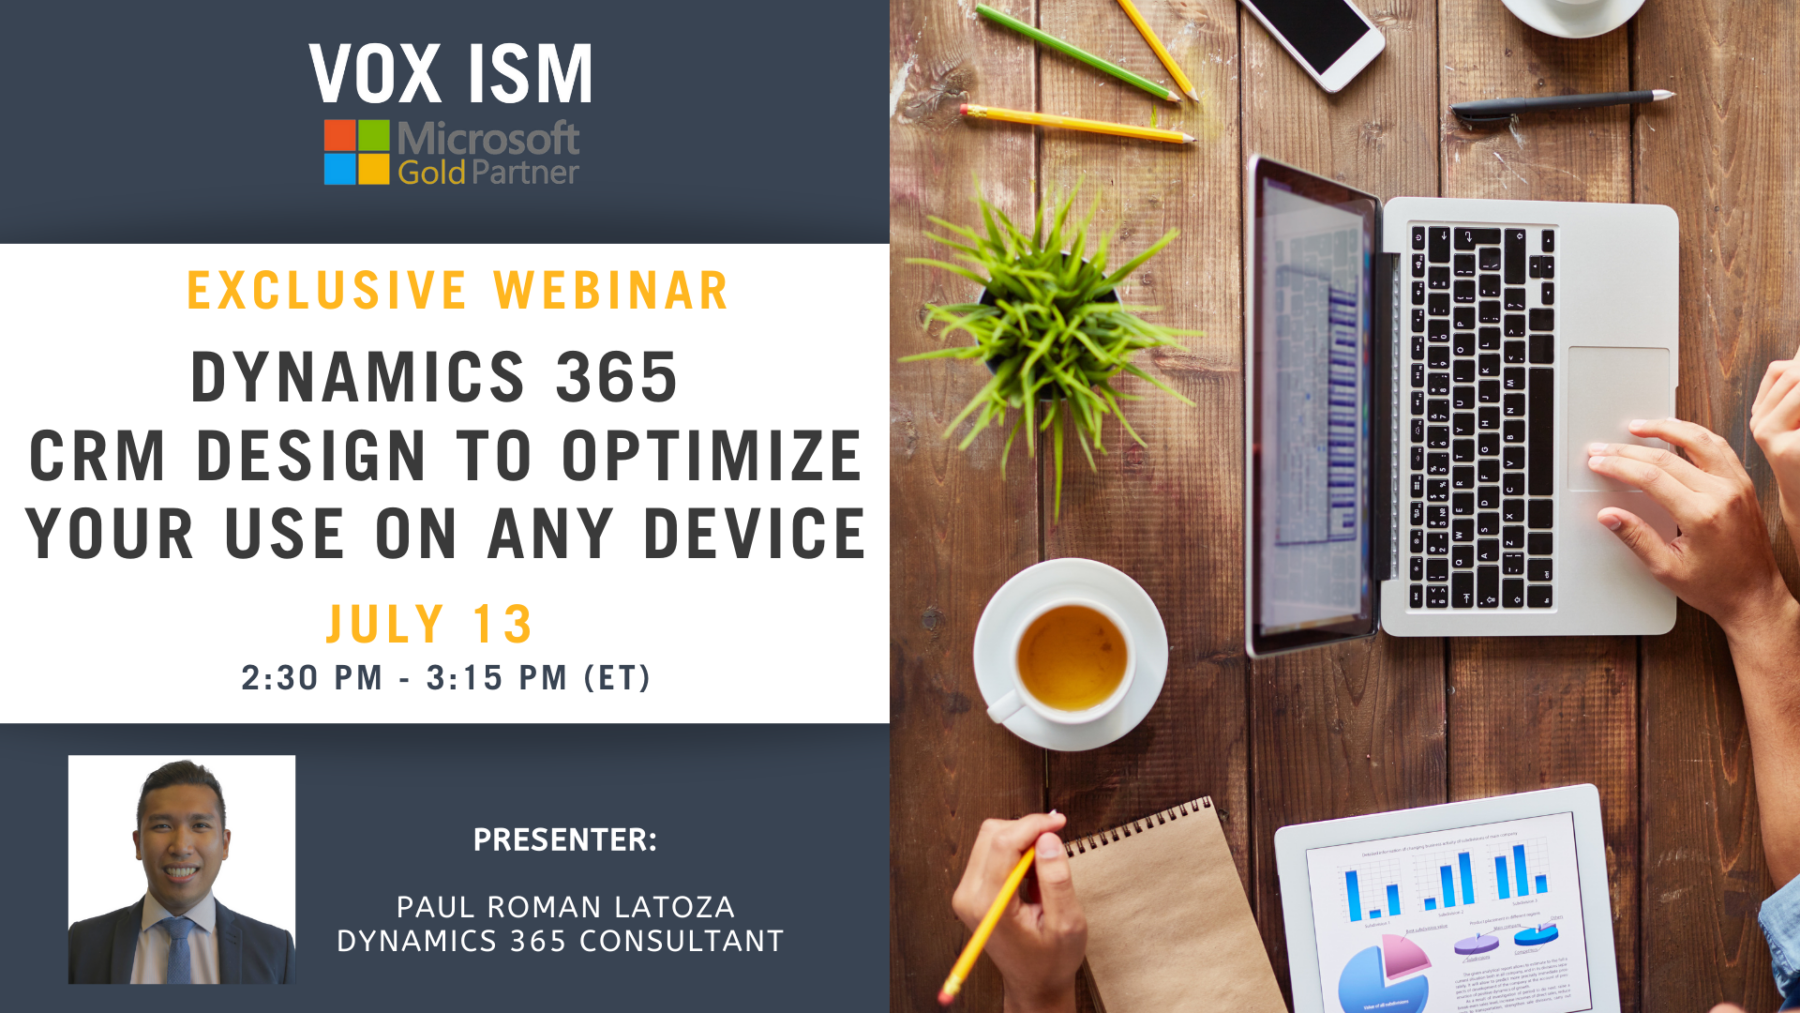 Dynamics 365 CRM design to optimize your use on any device - July 13 - Webinar VOX ISM